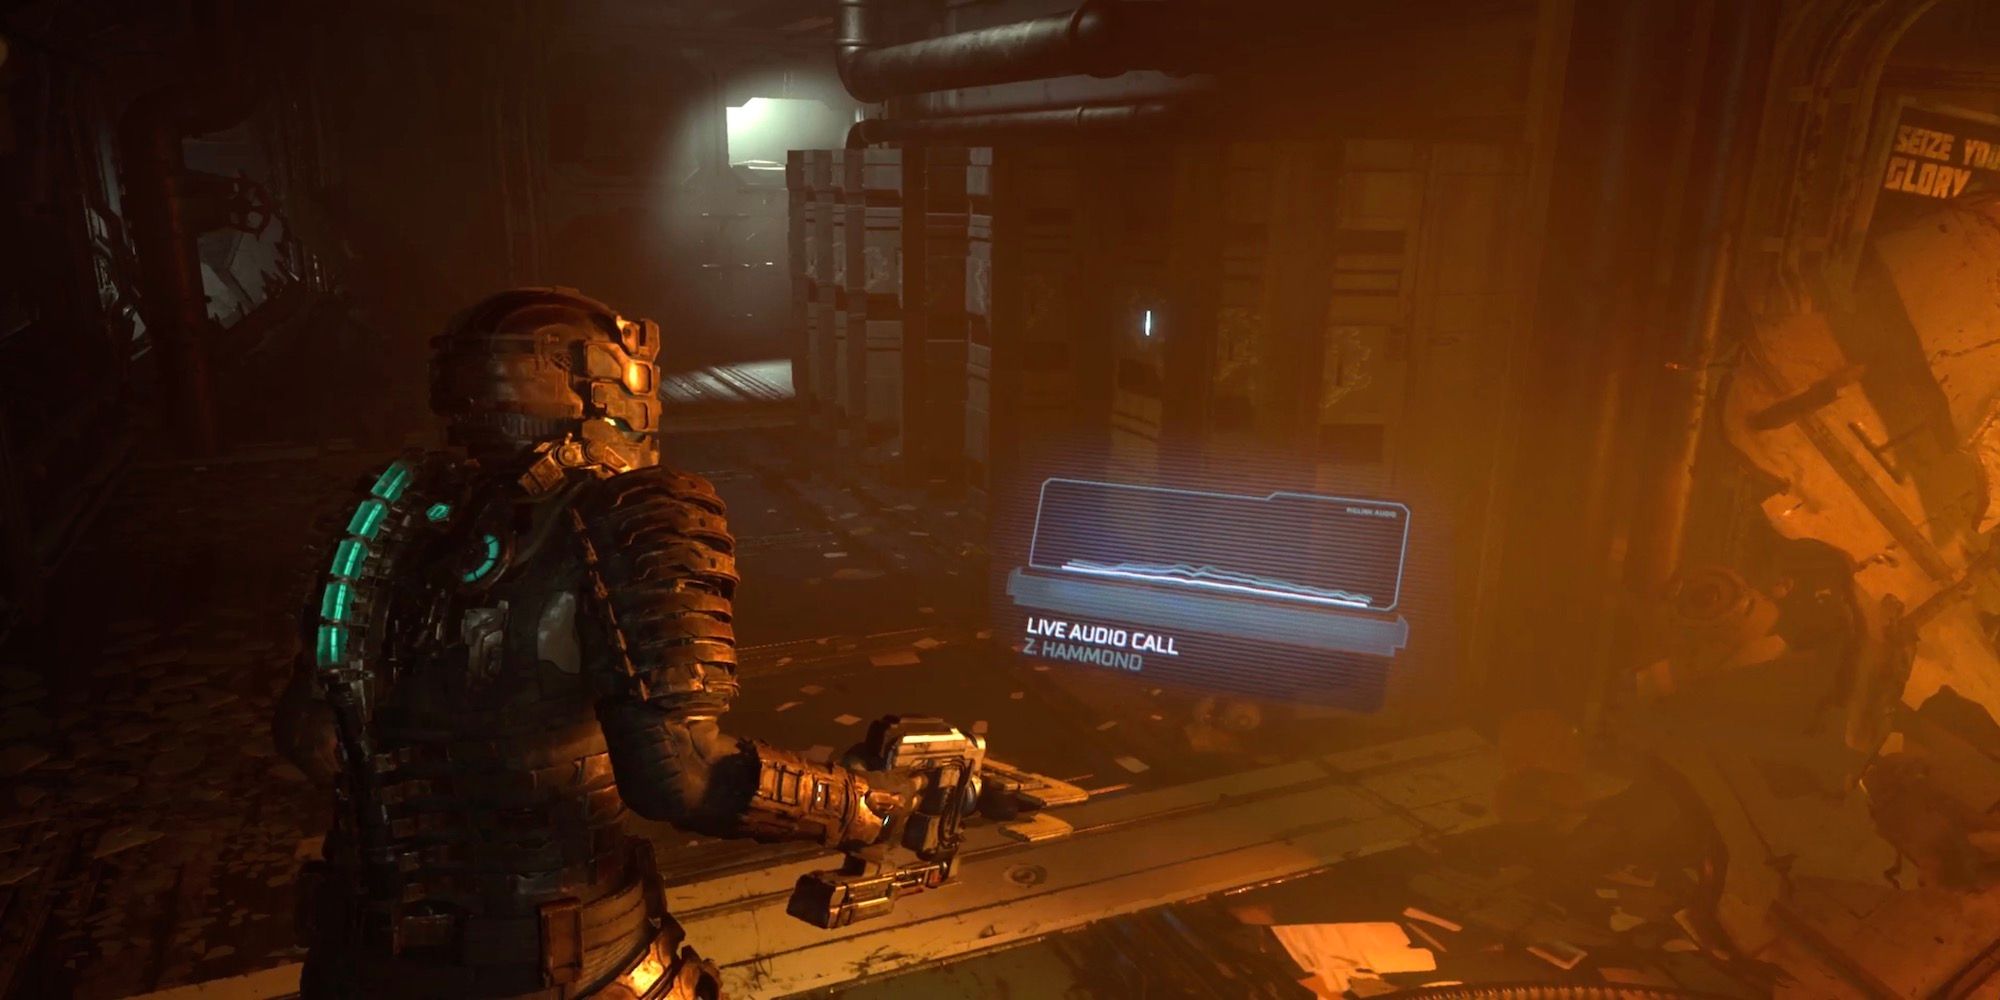 Talking to Hammond on the radio in the Dead Space remake